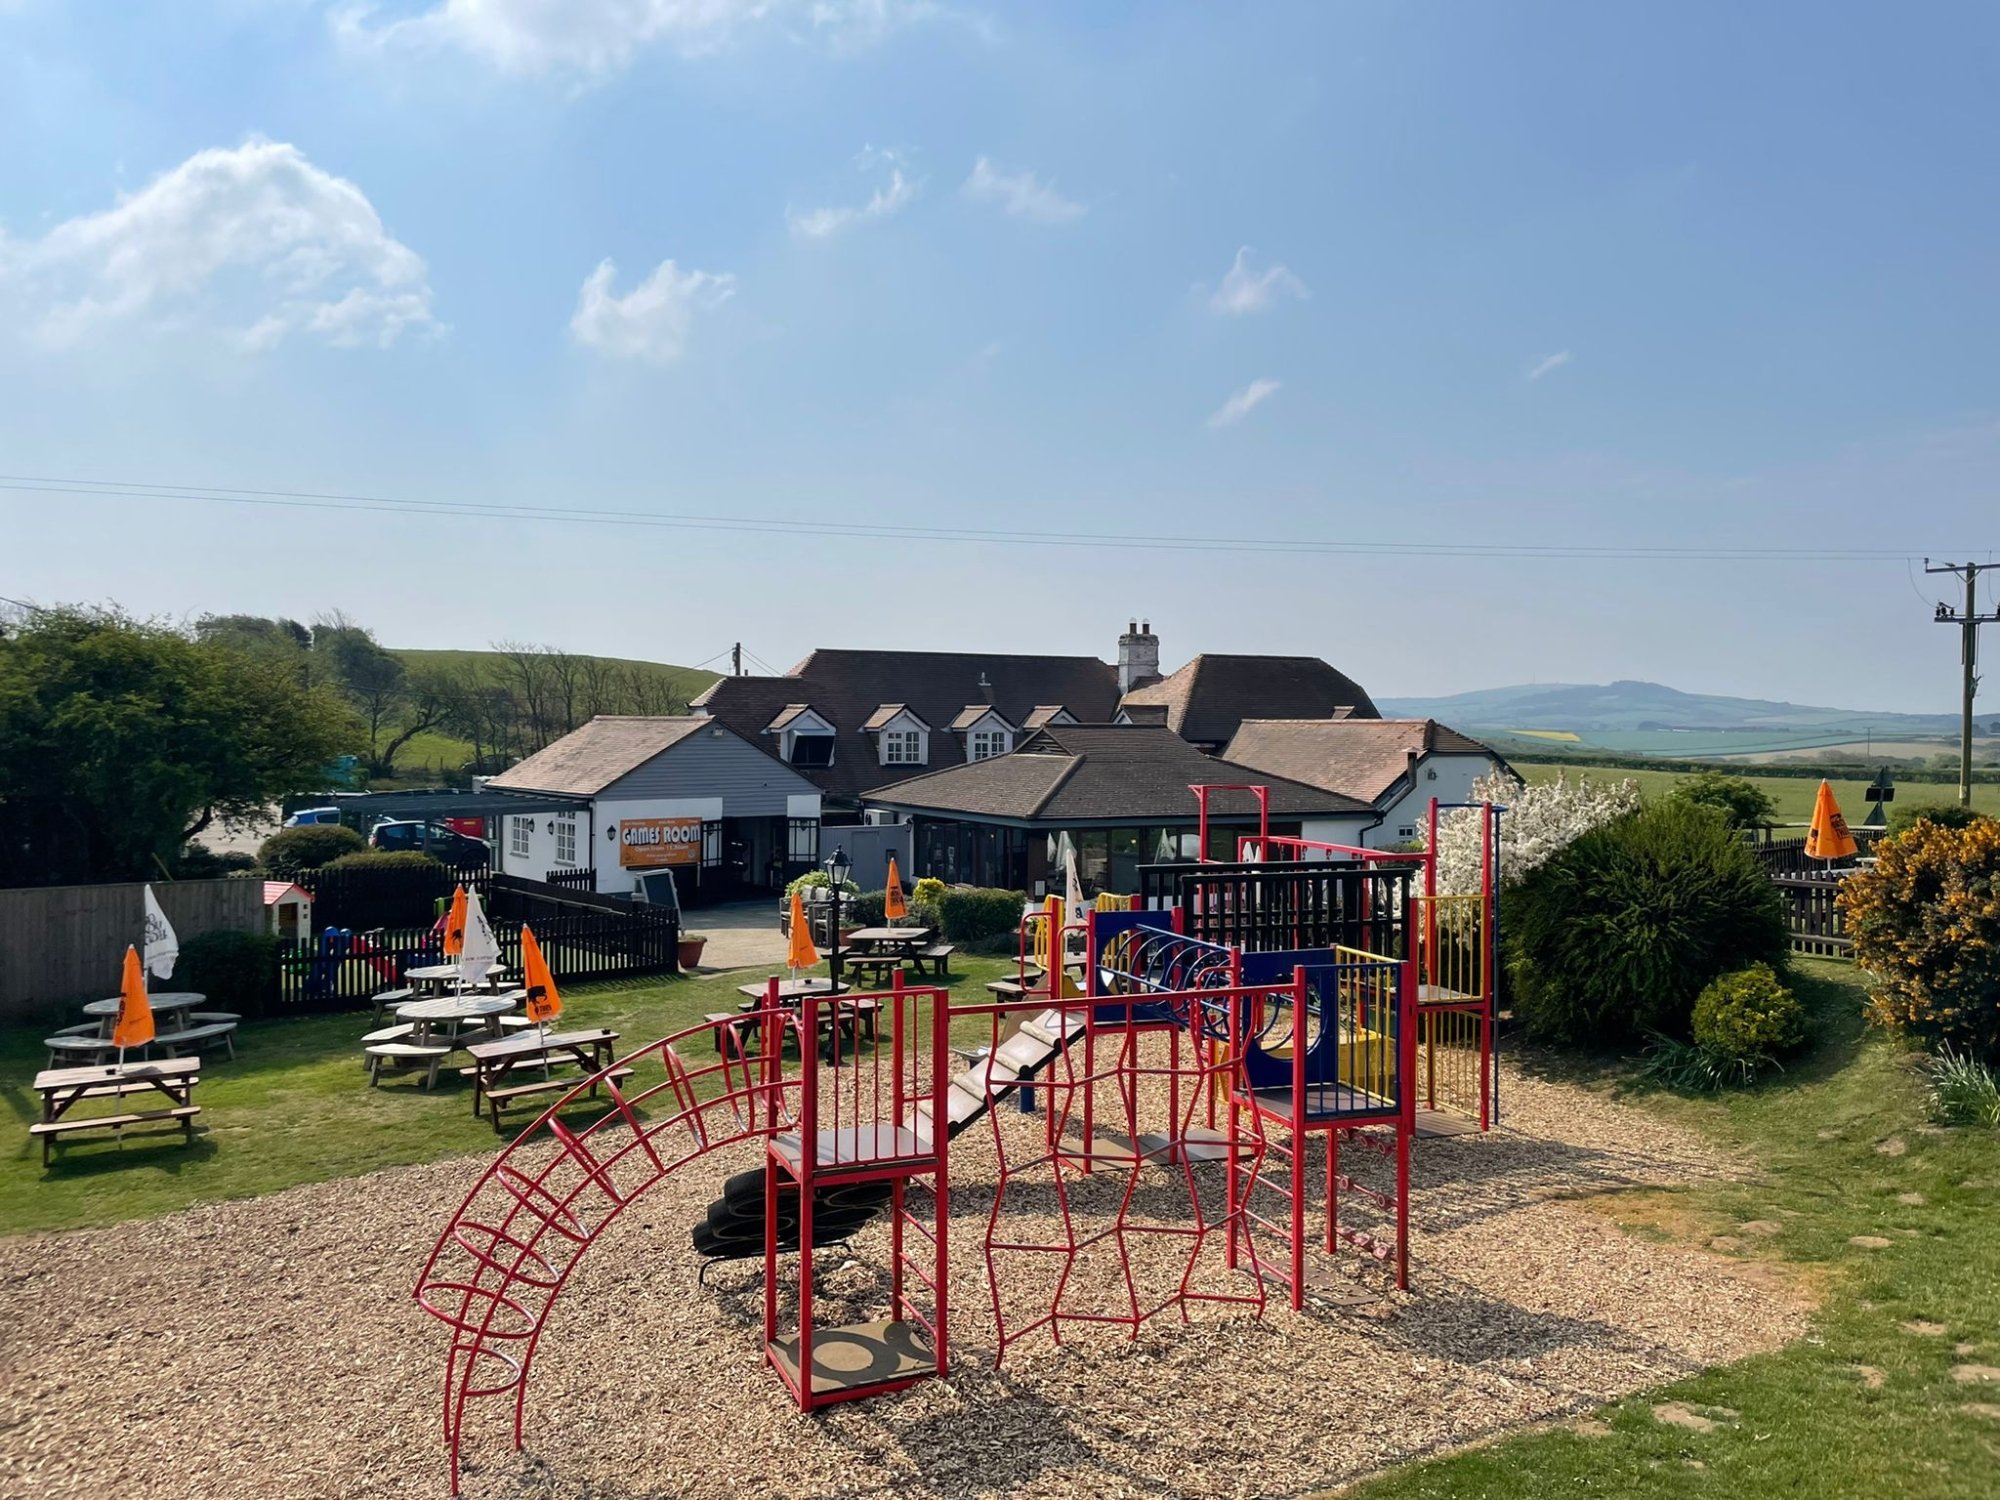 Children's playground with tables and chairs with countryside and blue skies in the background